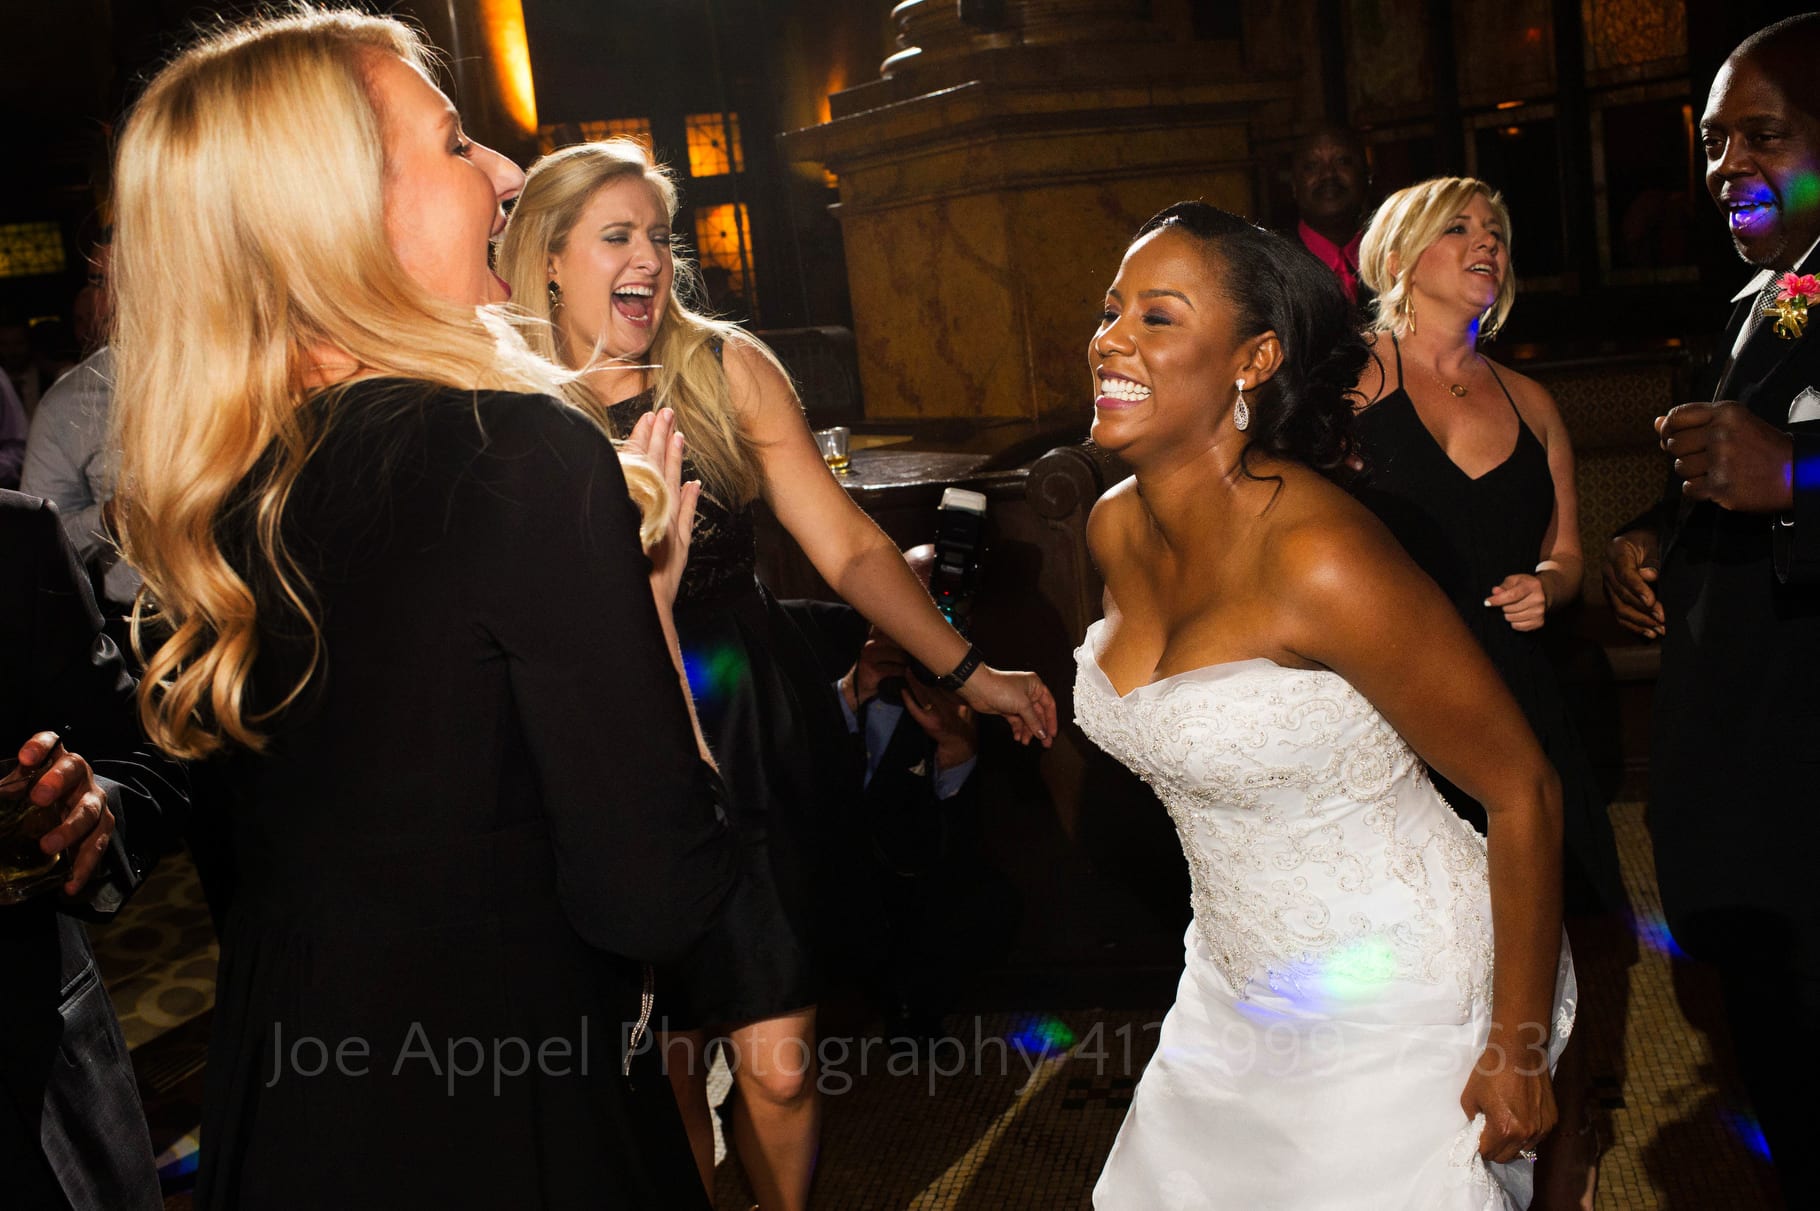 A bride faces left while dancing with three blond friends wearing black dresses.